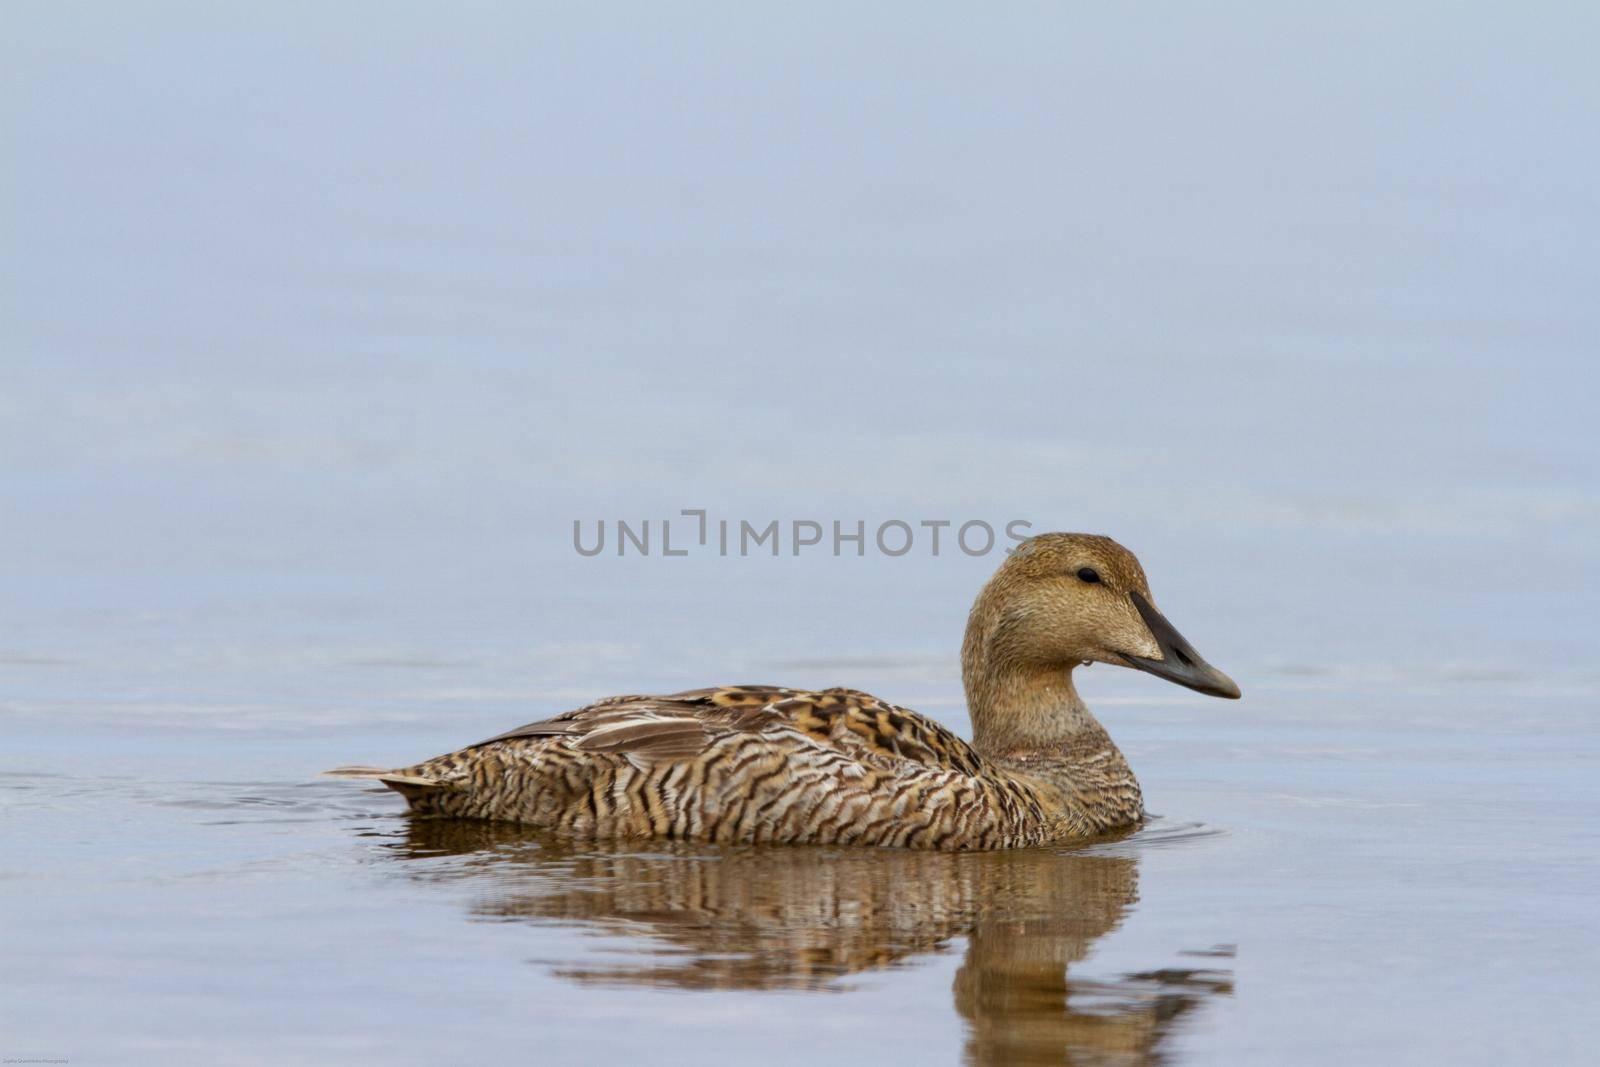 Female common eider duck swimming in a pond by Granchinho